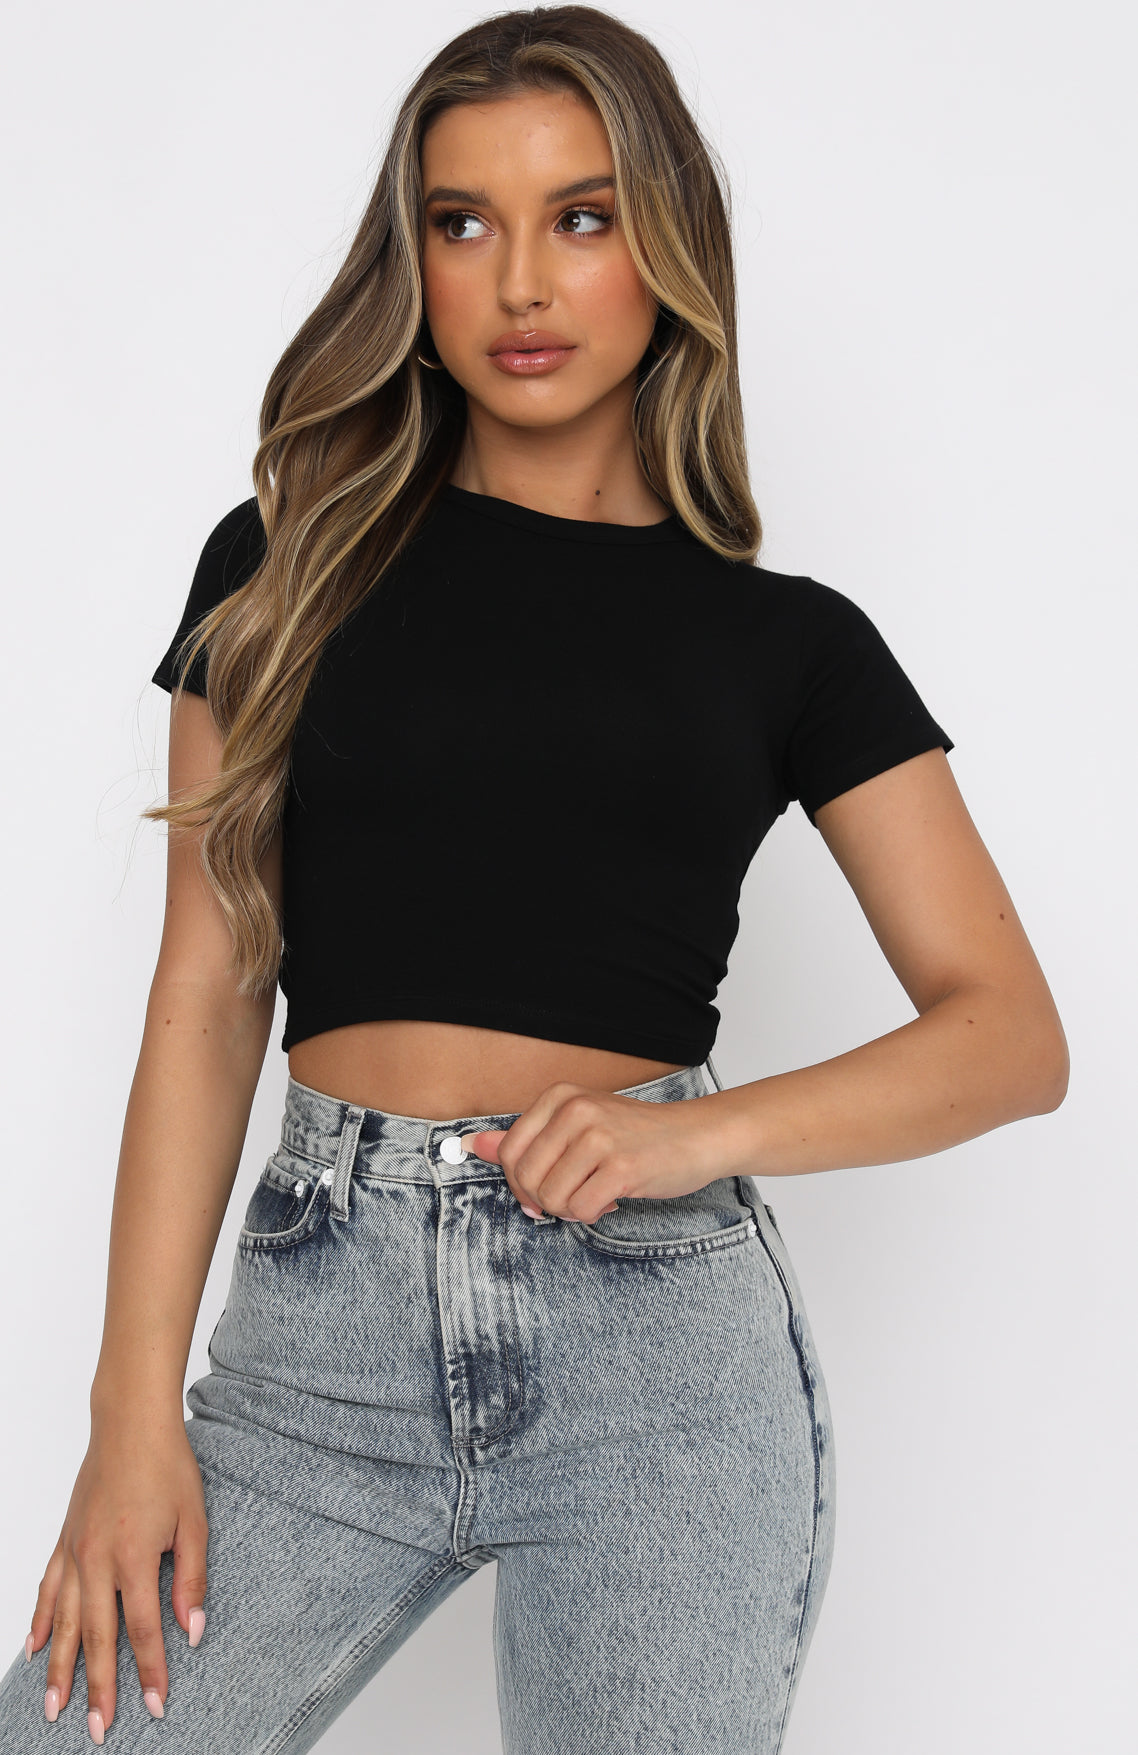 White Fox Boutique All for One Ribbed Crop